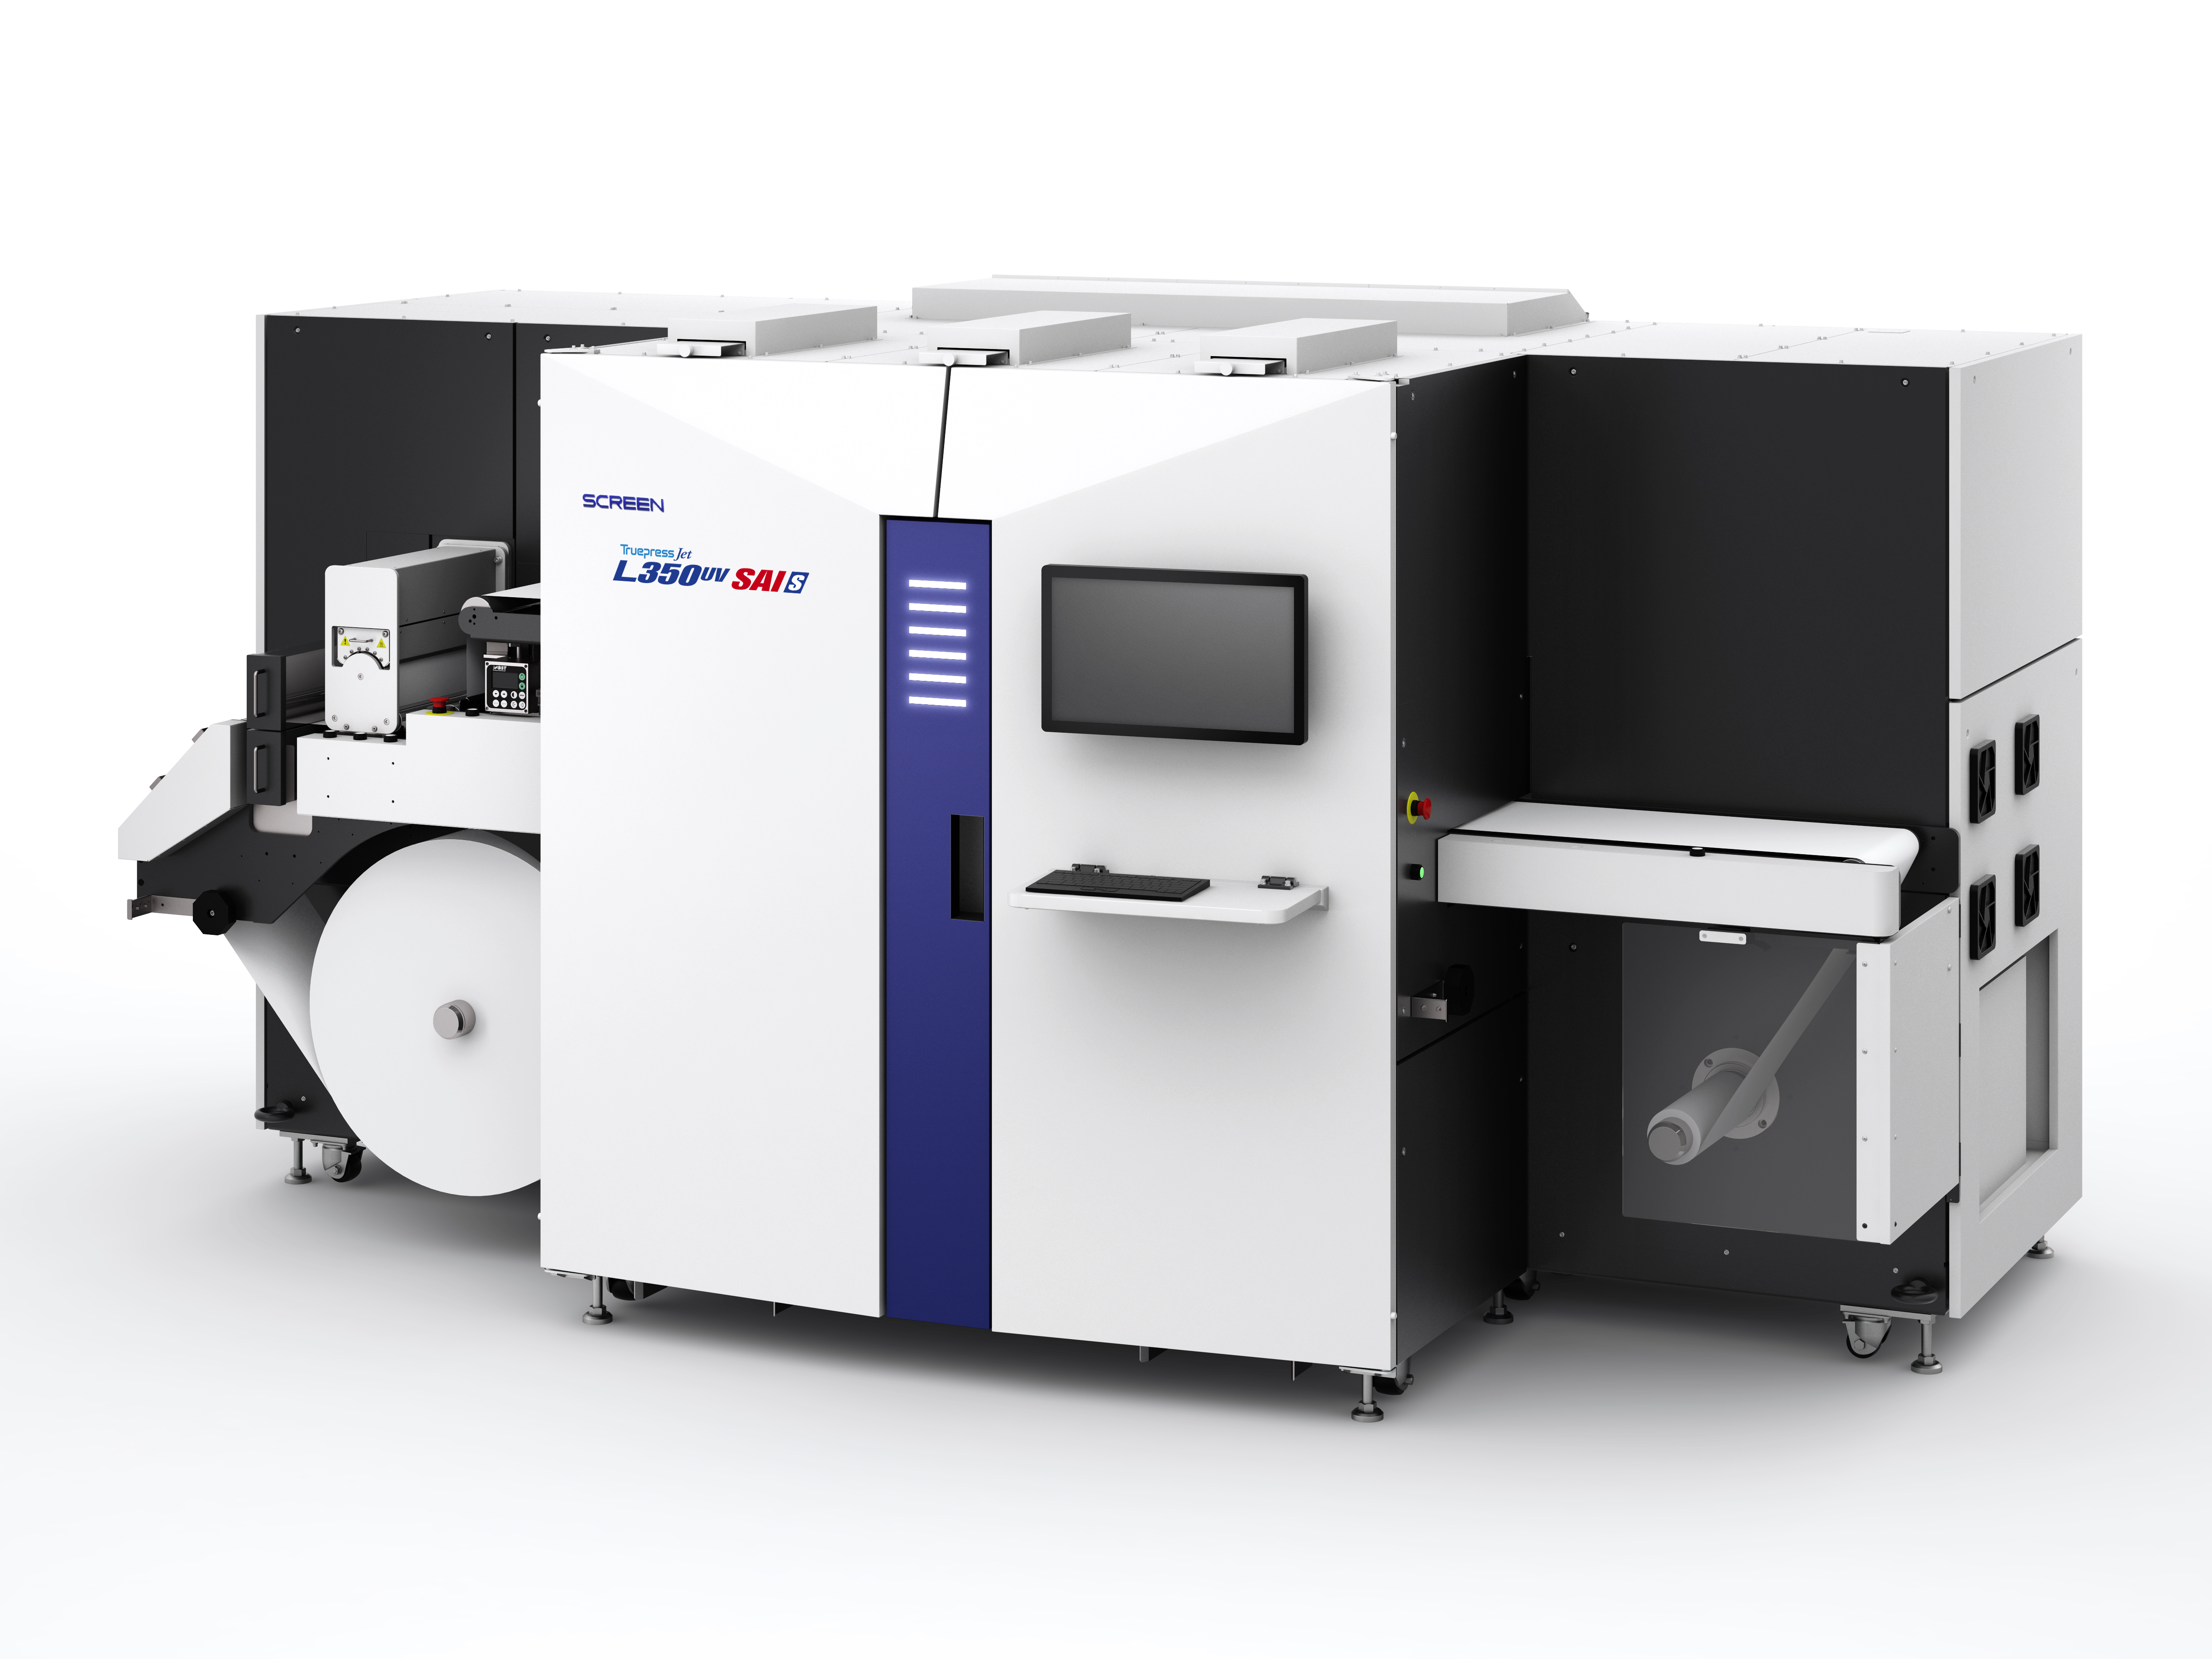 Image from SCREEN to debut new 80 m/hr, 7-colour label press at Labelexpo